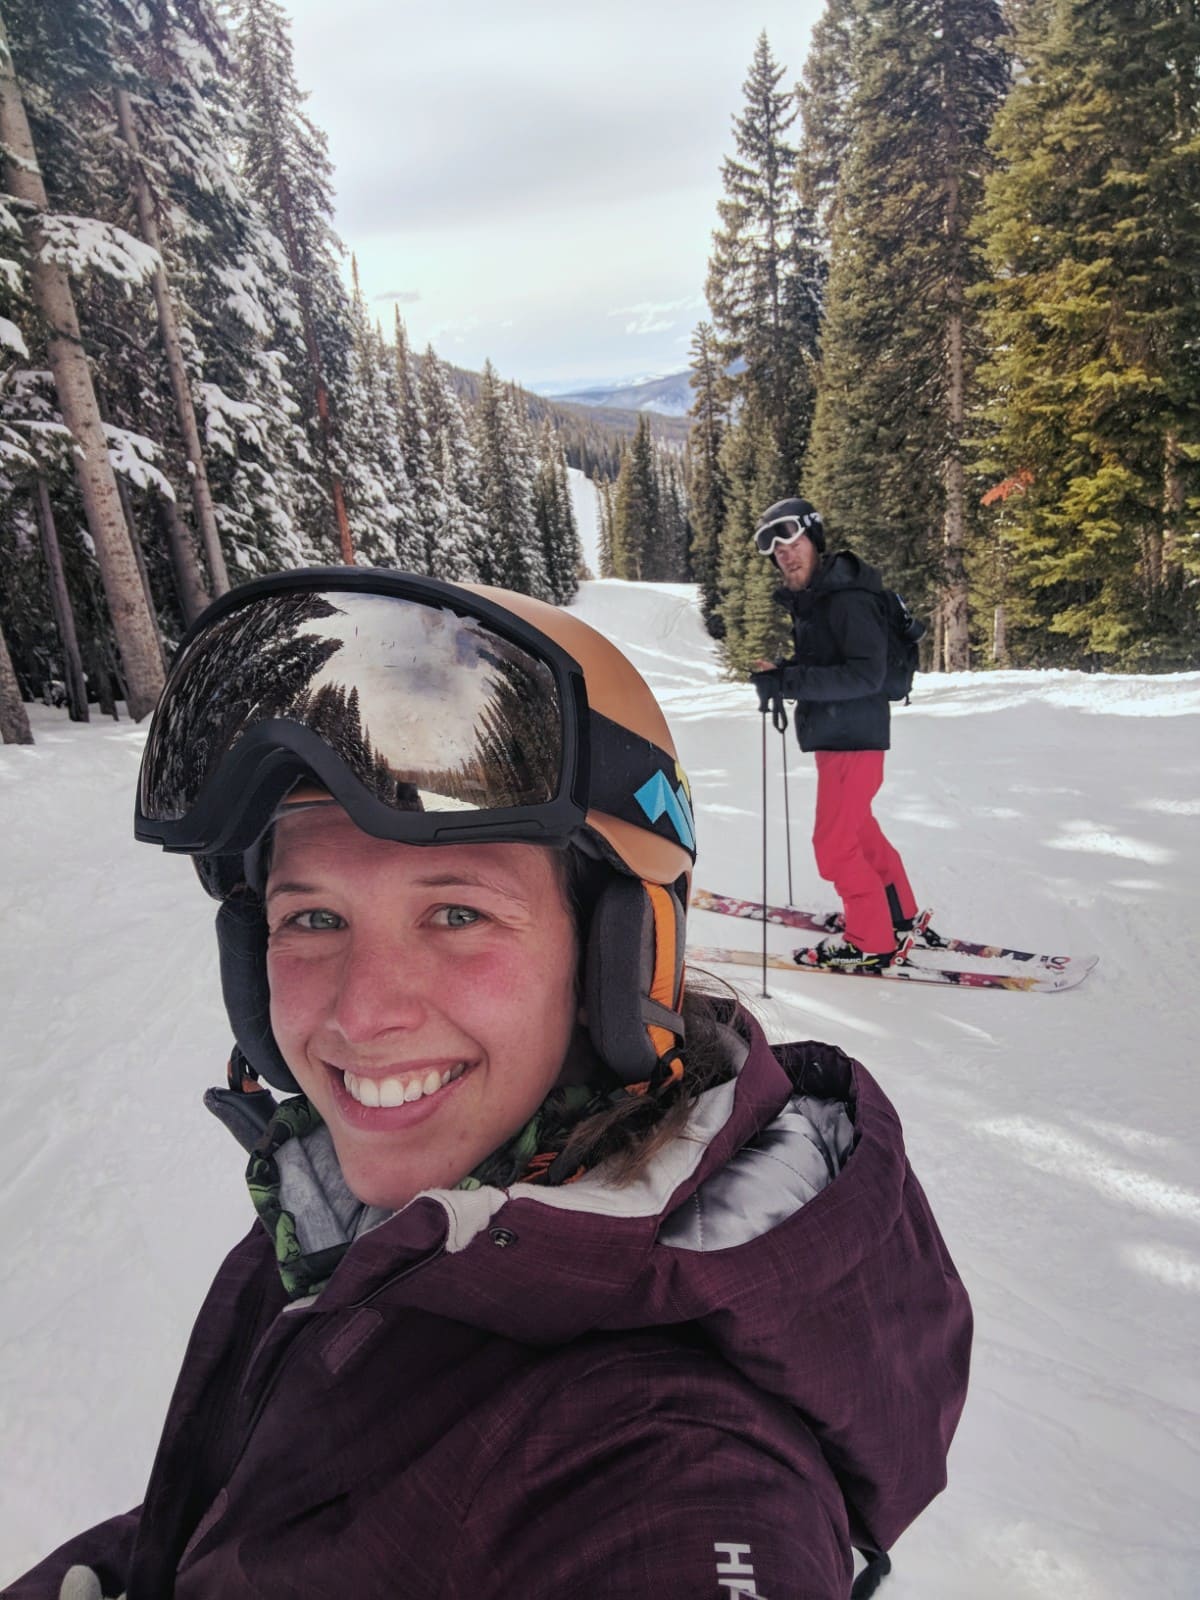 What to See and Ski in Vail | The Crooked Carrot